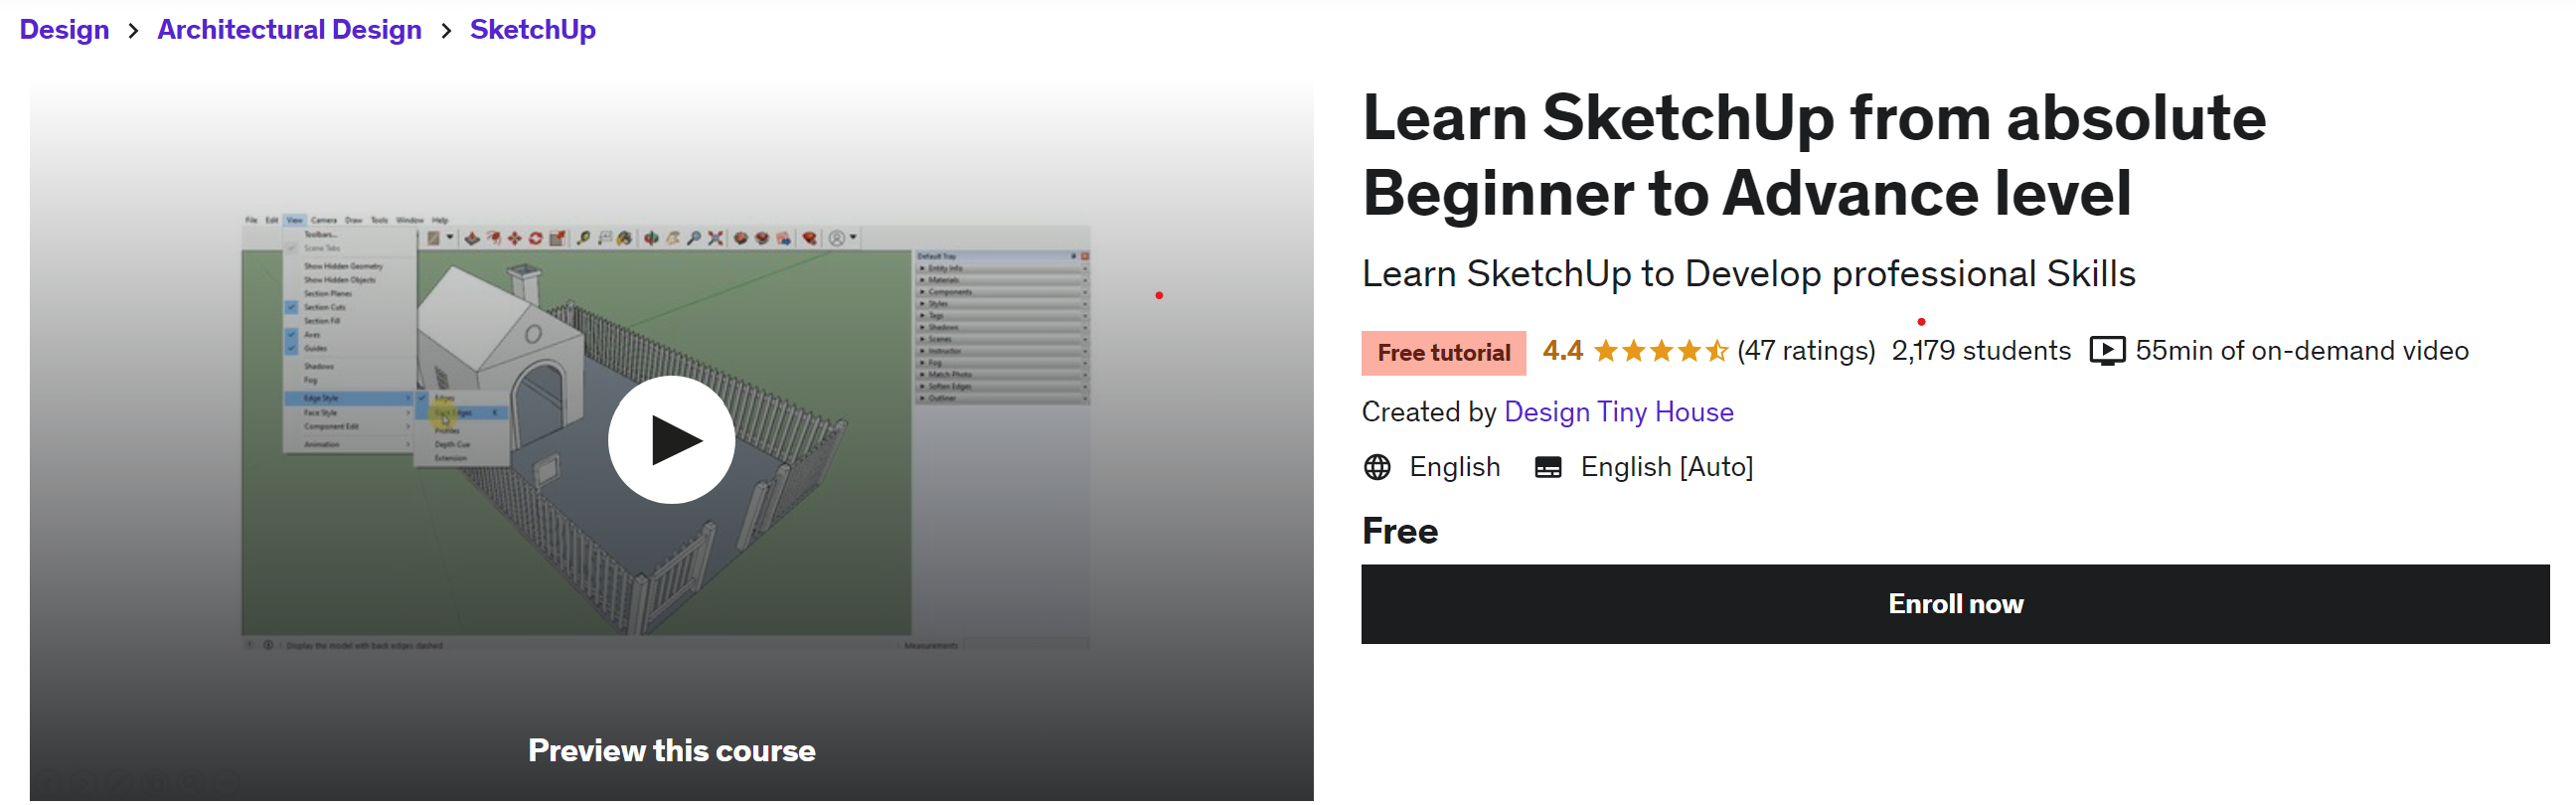 Learn SketchUp from Absolute Beginner to Advance level